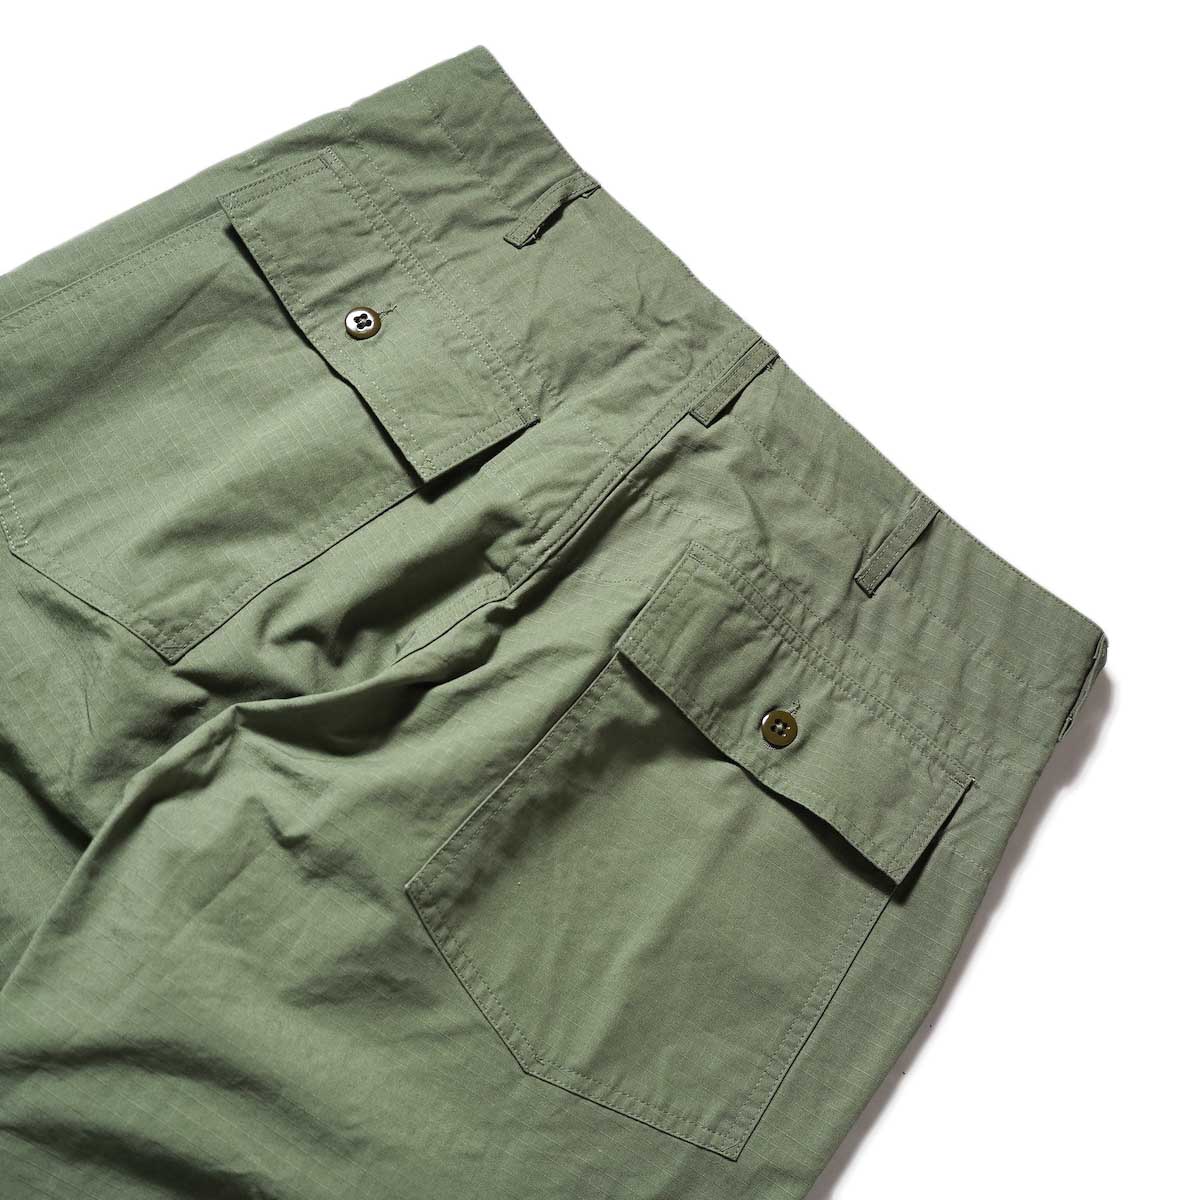 ENGINEERED GARMENTS / FATIGUE PANTS - Cotton Ripstop (Olive)ヒップポケット